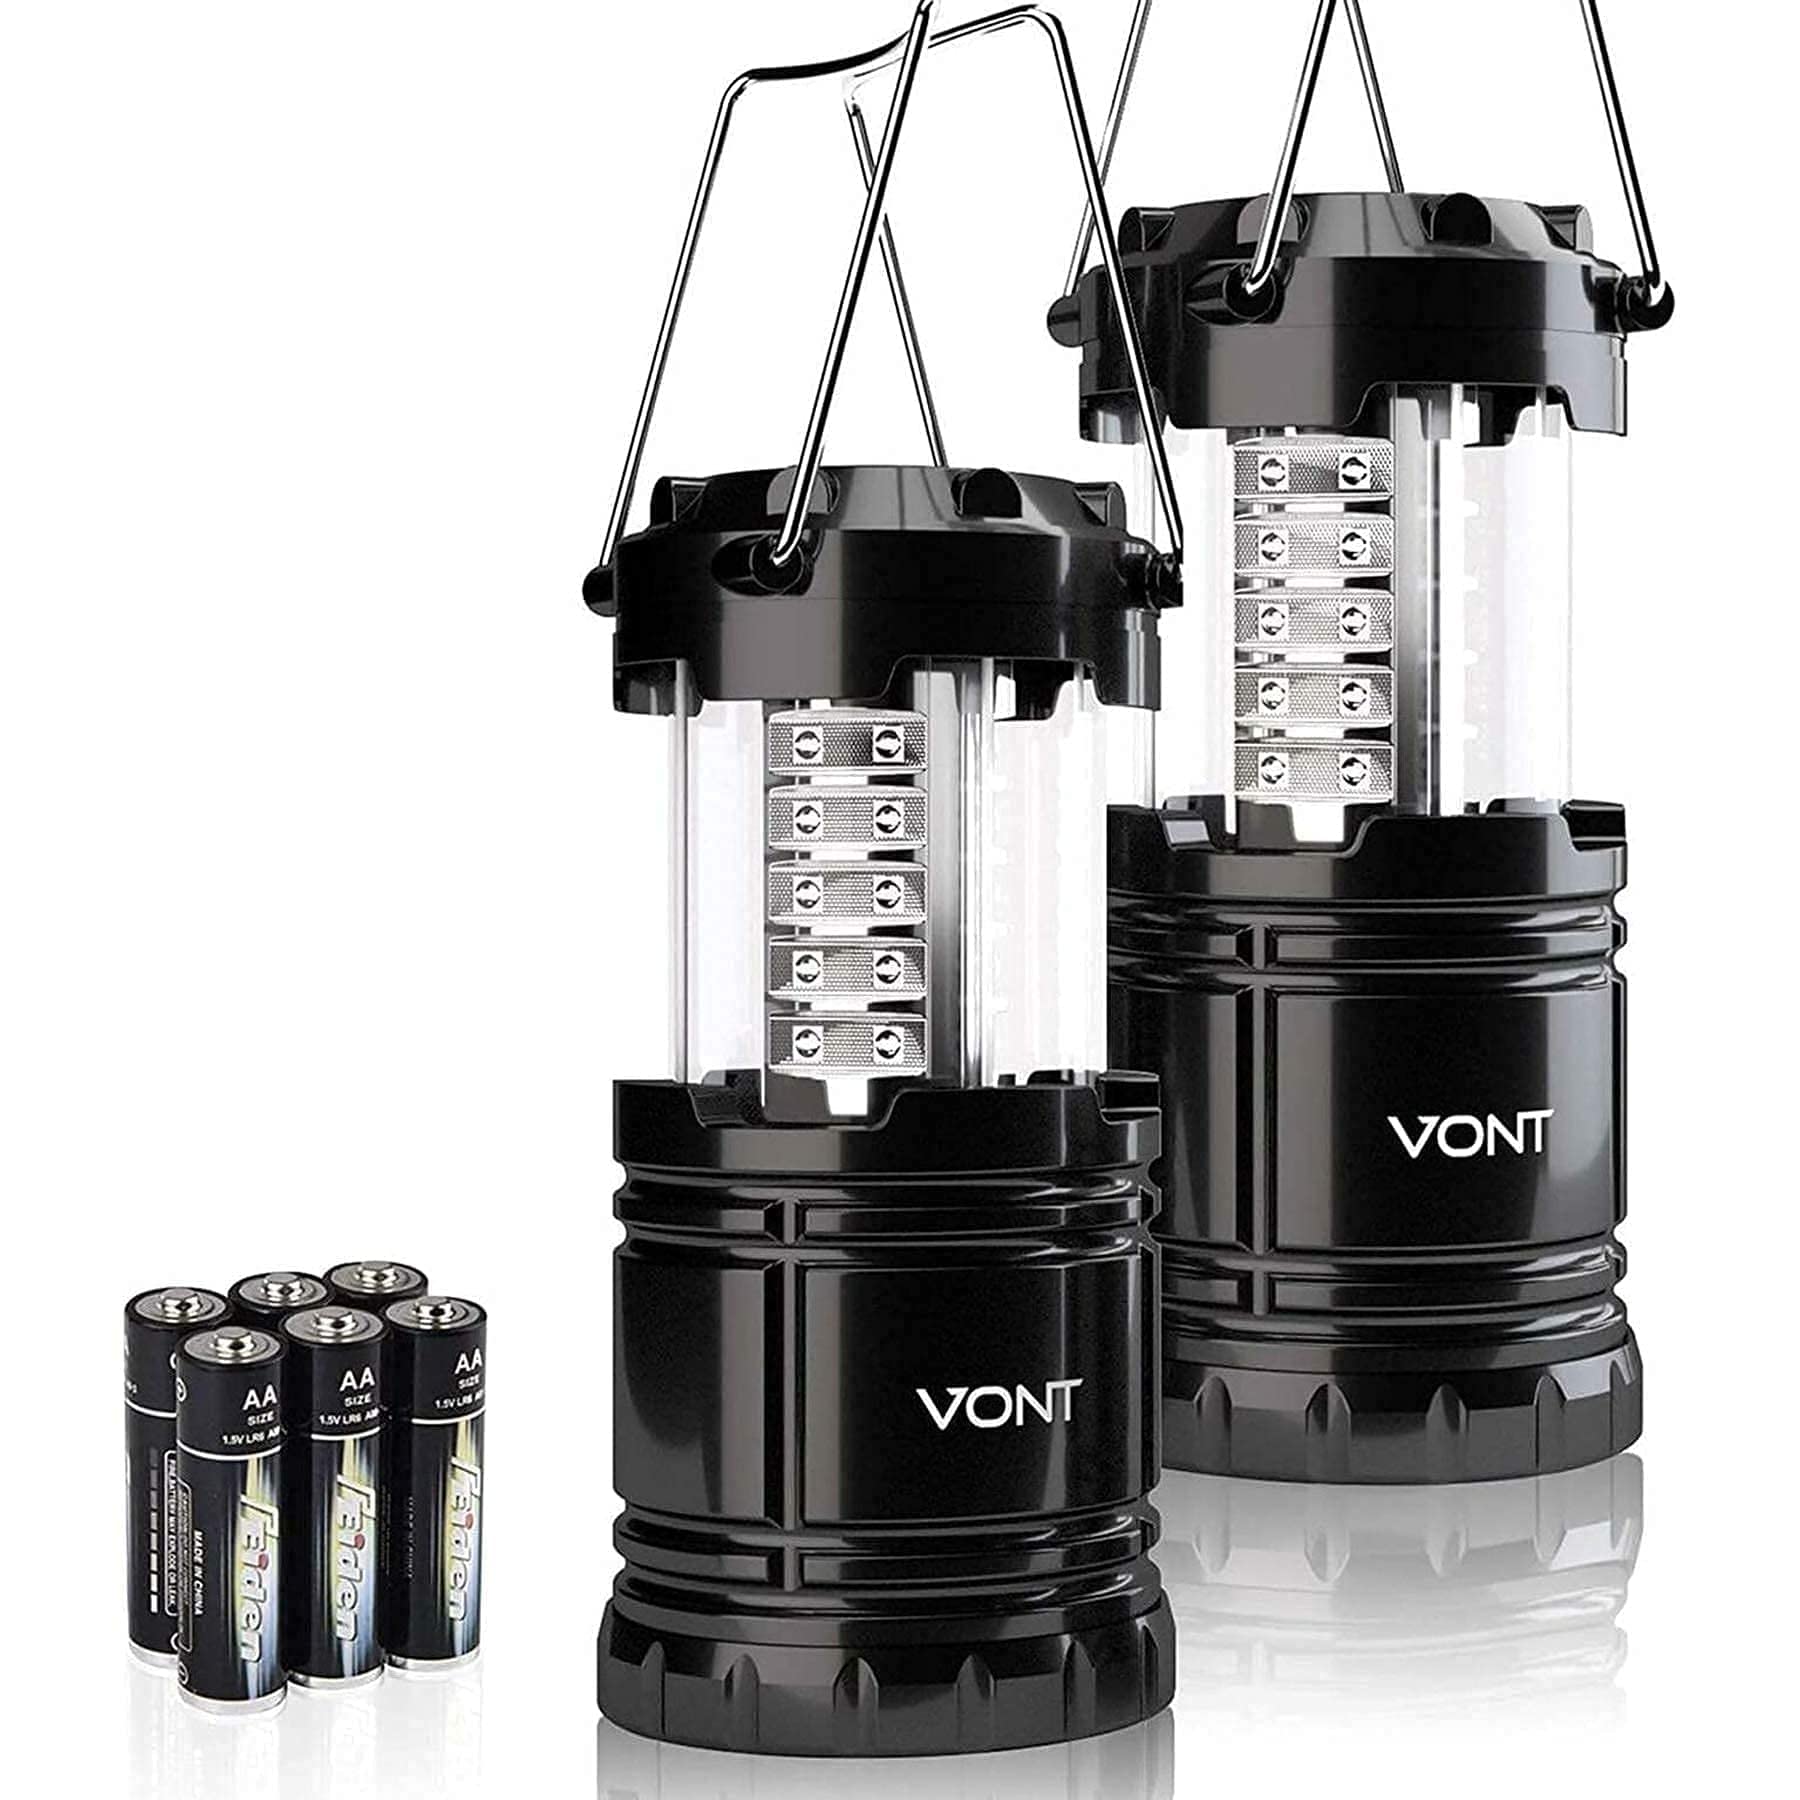 Vont LED Camping Lantern, LED Lanterns, Suitable Survival Kits for Hurricane, Emergency Light for Storm, Outages, Outdoor Portable Lanterns, Black, Collapsible, (Batteries Included)